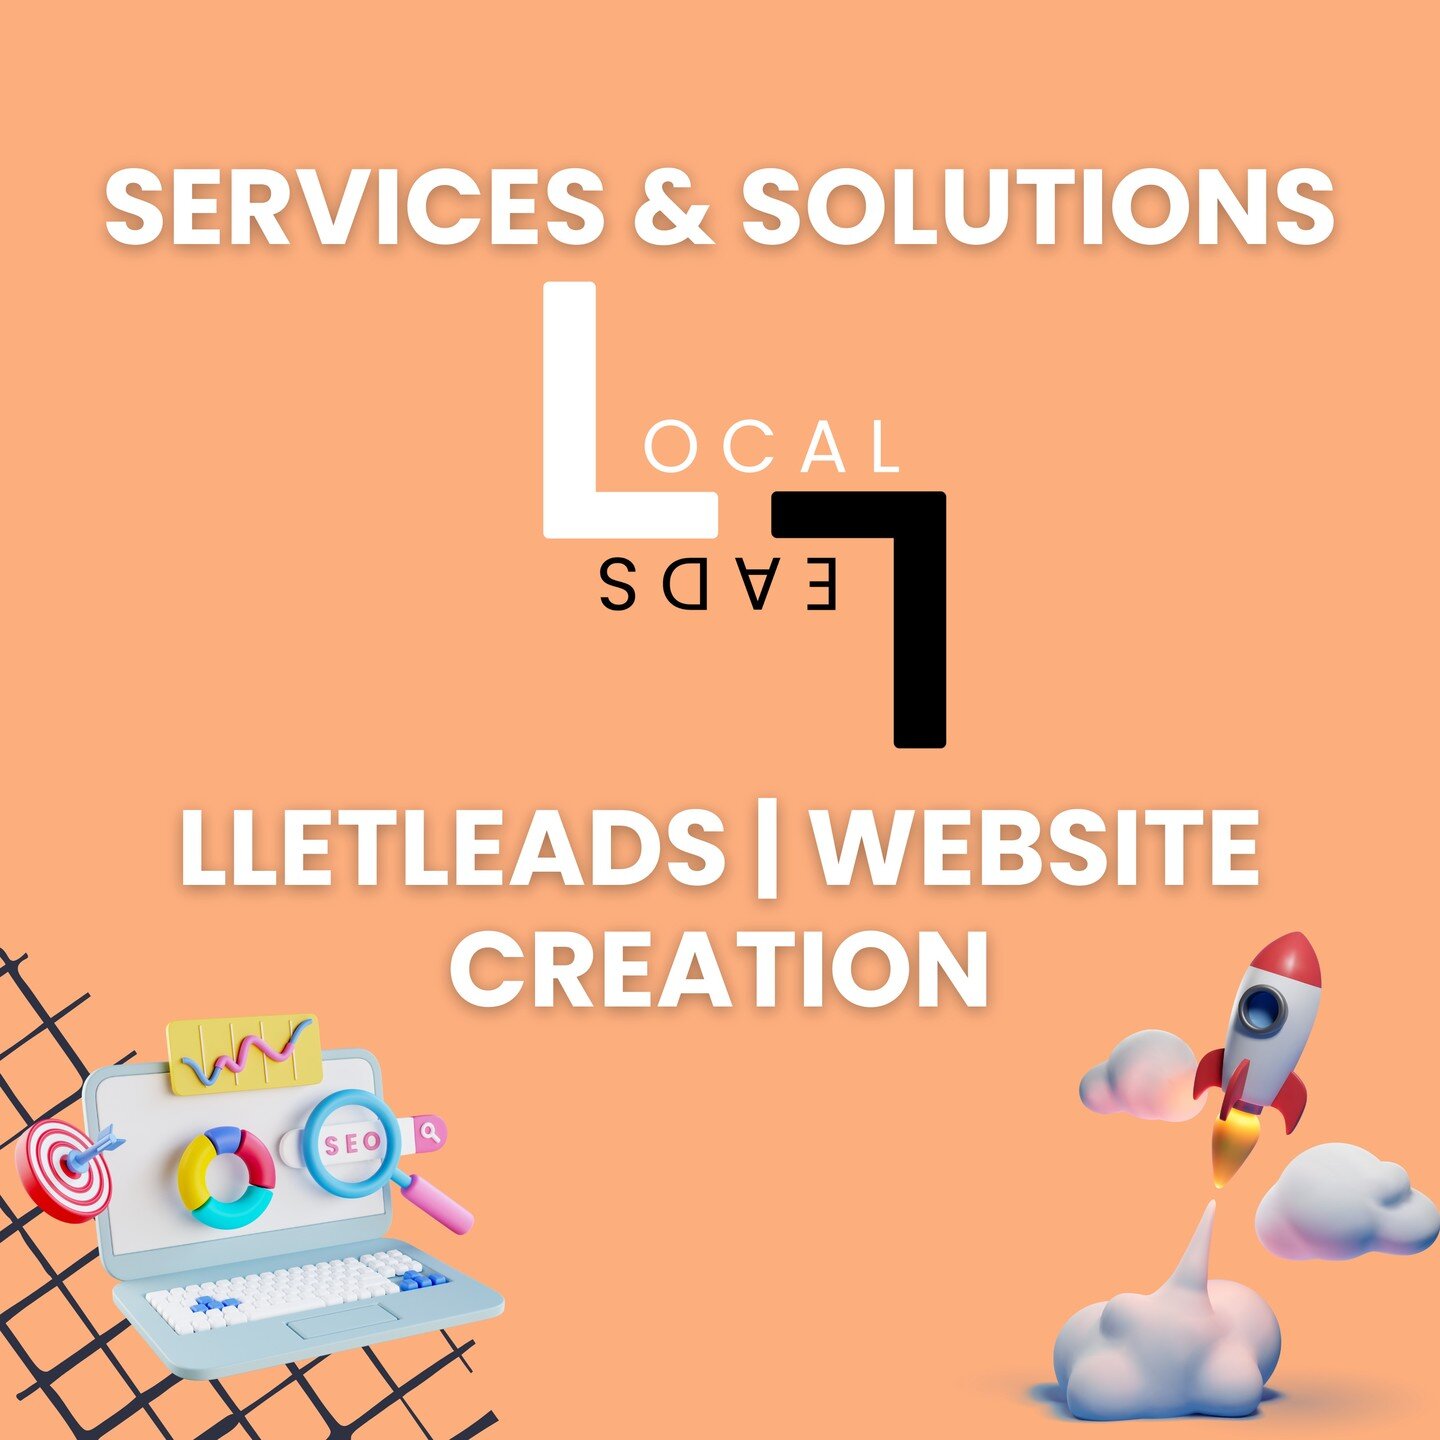 Lletleads | Website creation 
🇬🇧
Our services aim to offer you a intuitive and fast approach, where we are able to crafts meticulously designed websites that align with your brand and values ✨. 
We ensure your website is not only visually appealing